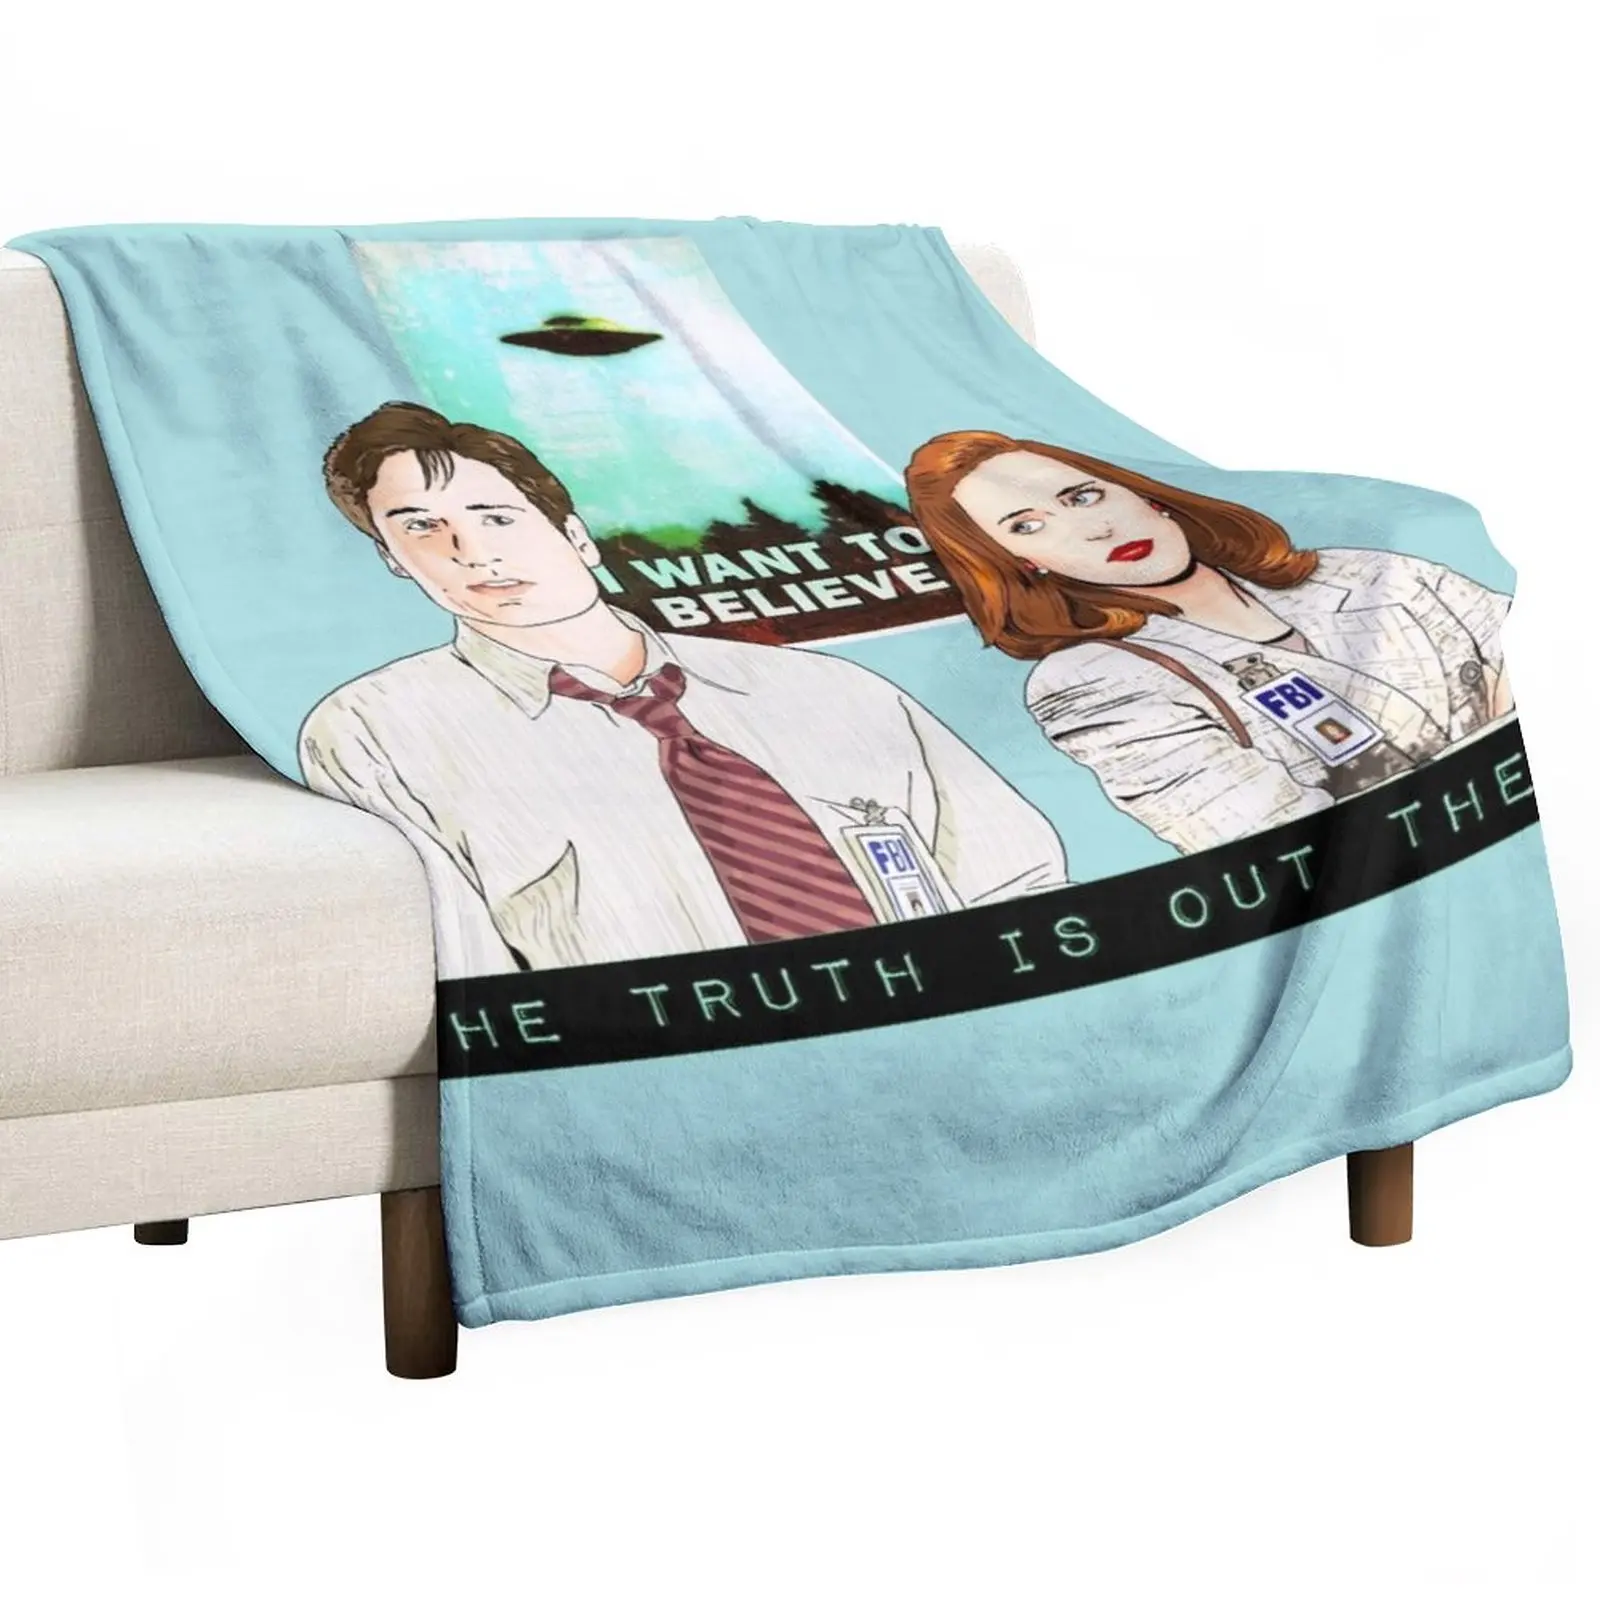 

The X files the truth is out there I want to believe by Mimie Throw Blanket Shaggy Blanket Large Blanket